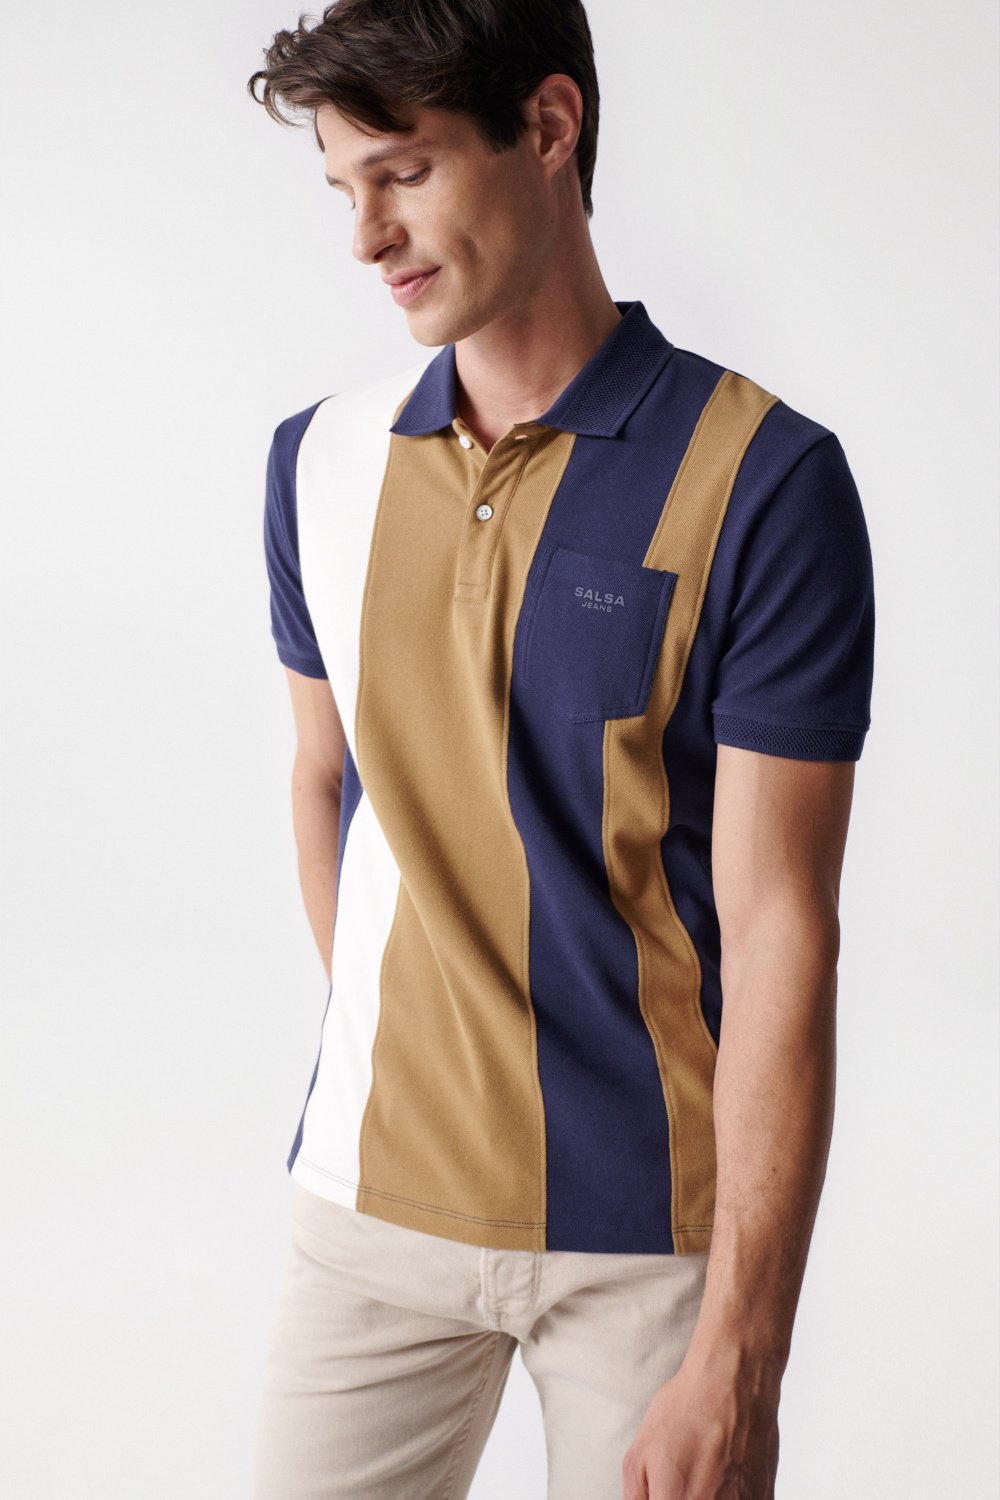 Polo shirt with vertical stripes - Salsa